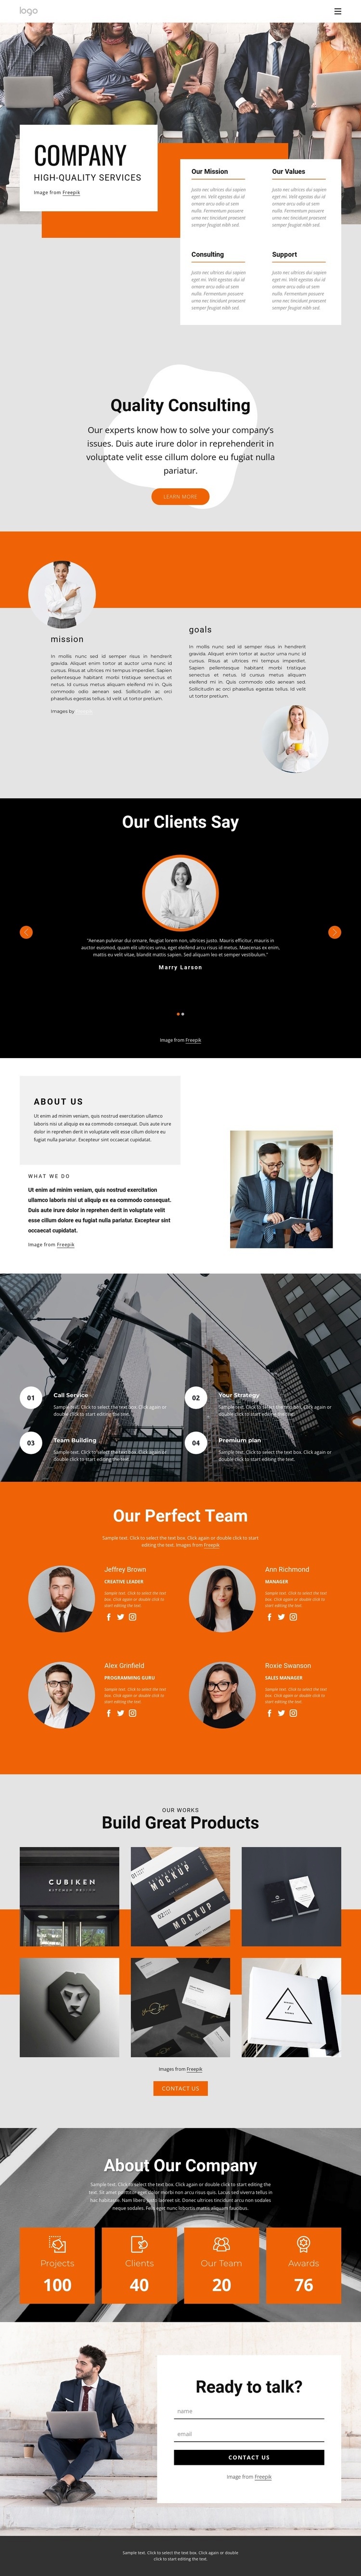 Hight quality consulting firm Web Page Design